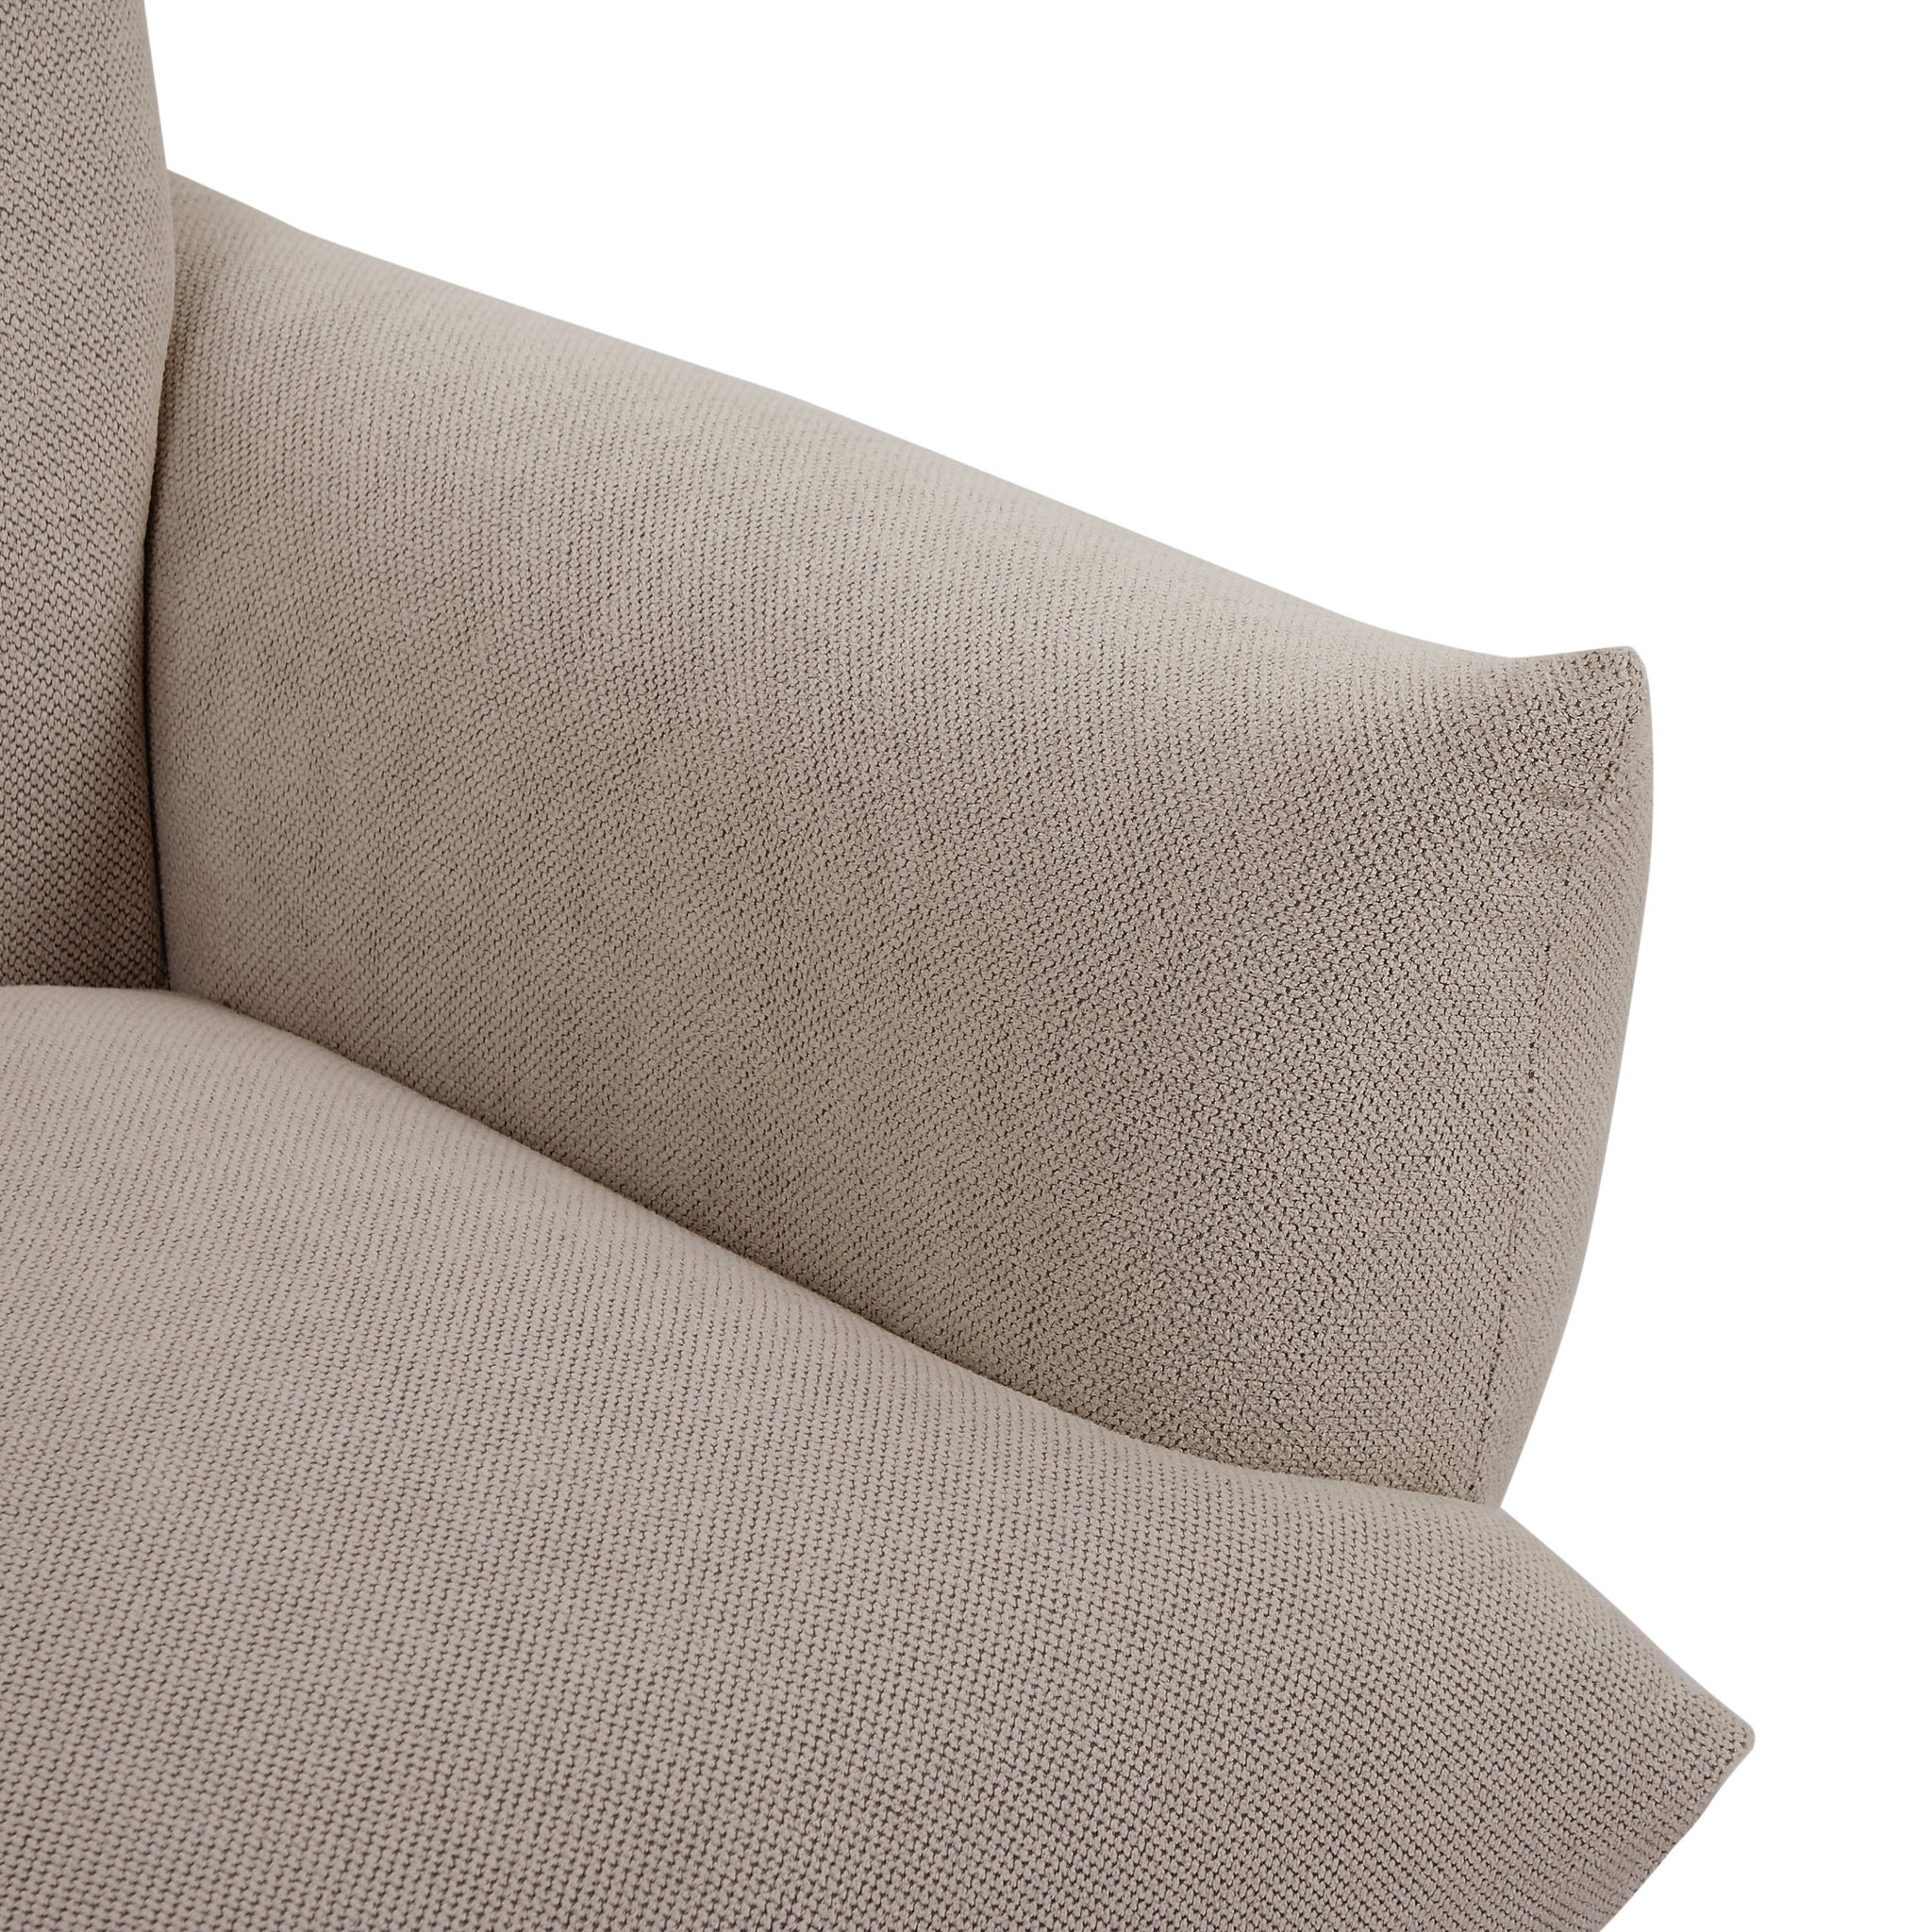 Oversized Living Room Accent Armchair Upholstered beige-foam-fabric